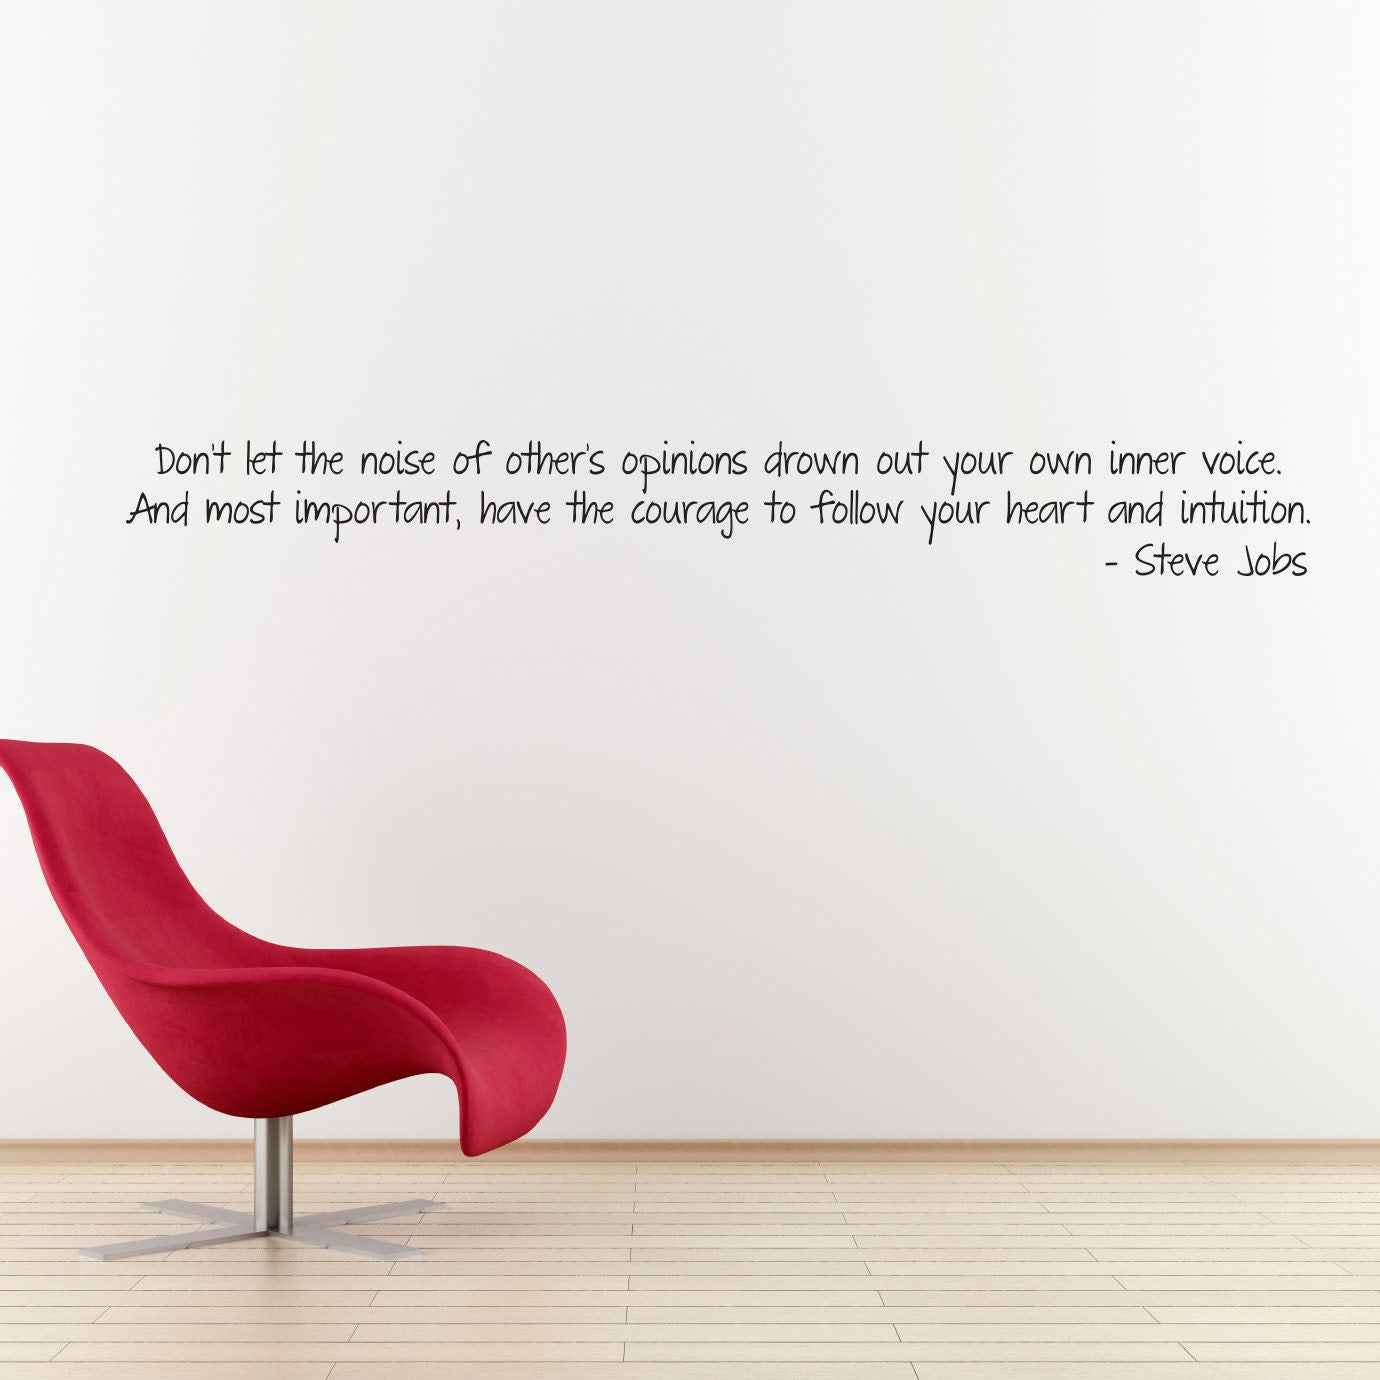 Steve Jobs Quote Wall Decal - Follow your Heart Decal - Large